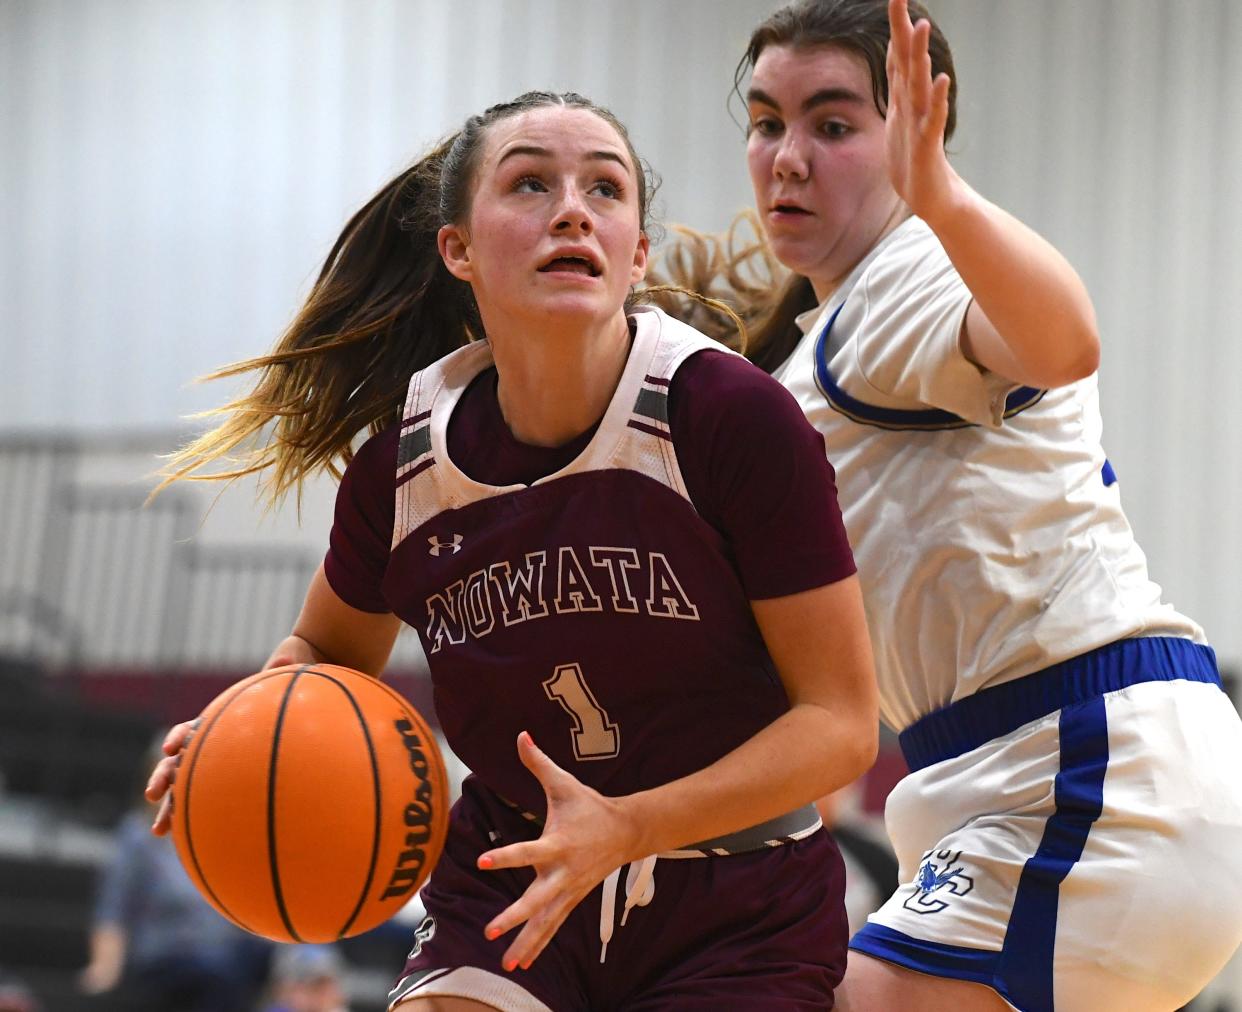 Nowata High School's Jordyn Ashley (1) drives the ball during basketball action at the Ty Hewitt Memorial Tournament in Nowata on Dec. 4, 2023. The Lady Ironmen defeated Rejoice Christian 44-38.